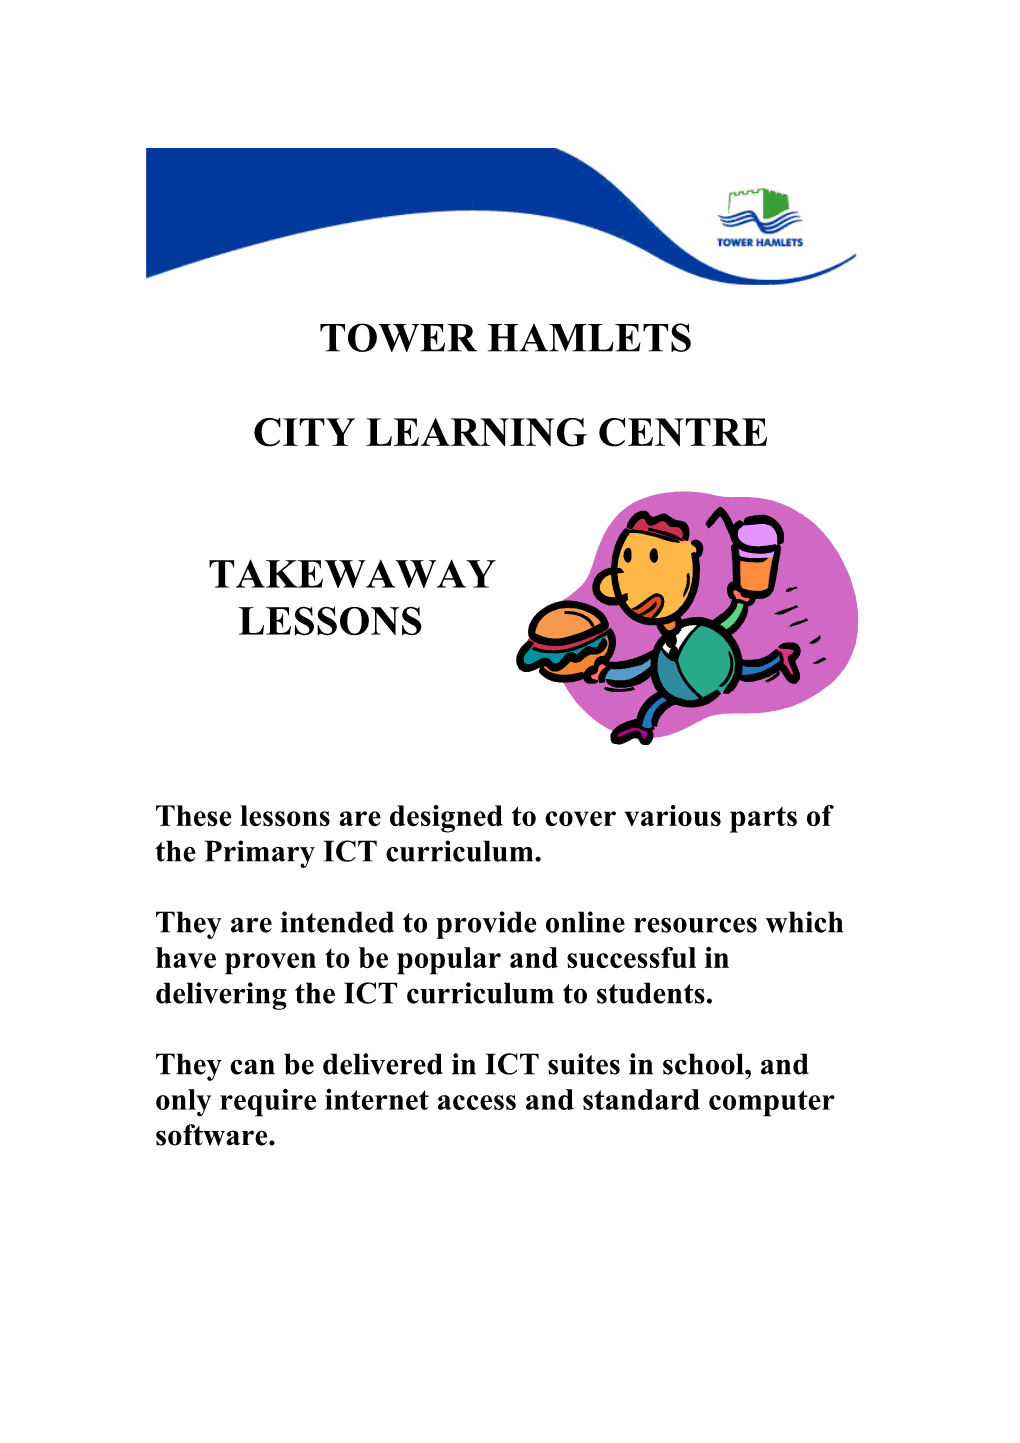 These Lessons Are Designed to Cover Various Parts of the Primary ICT Curriculum